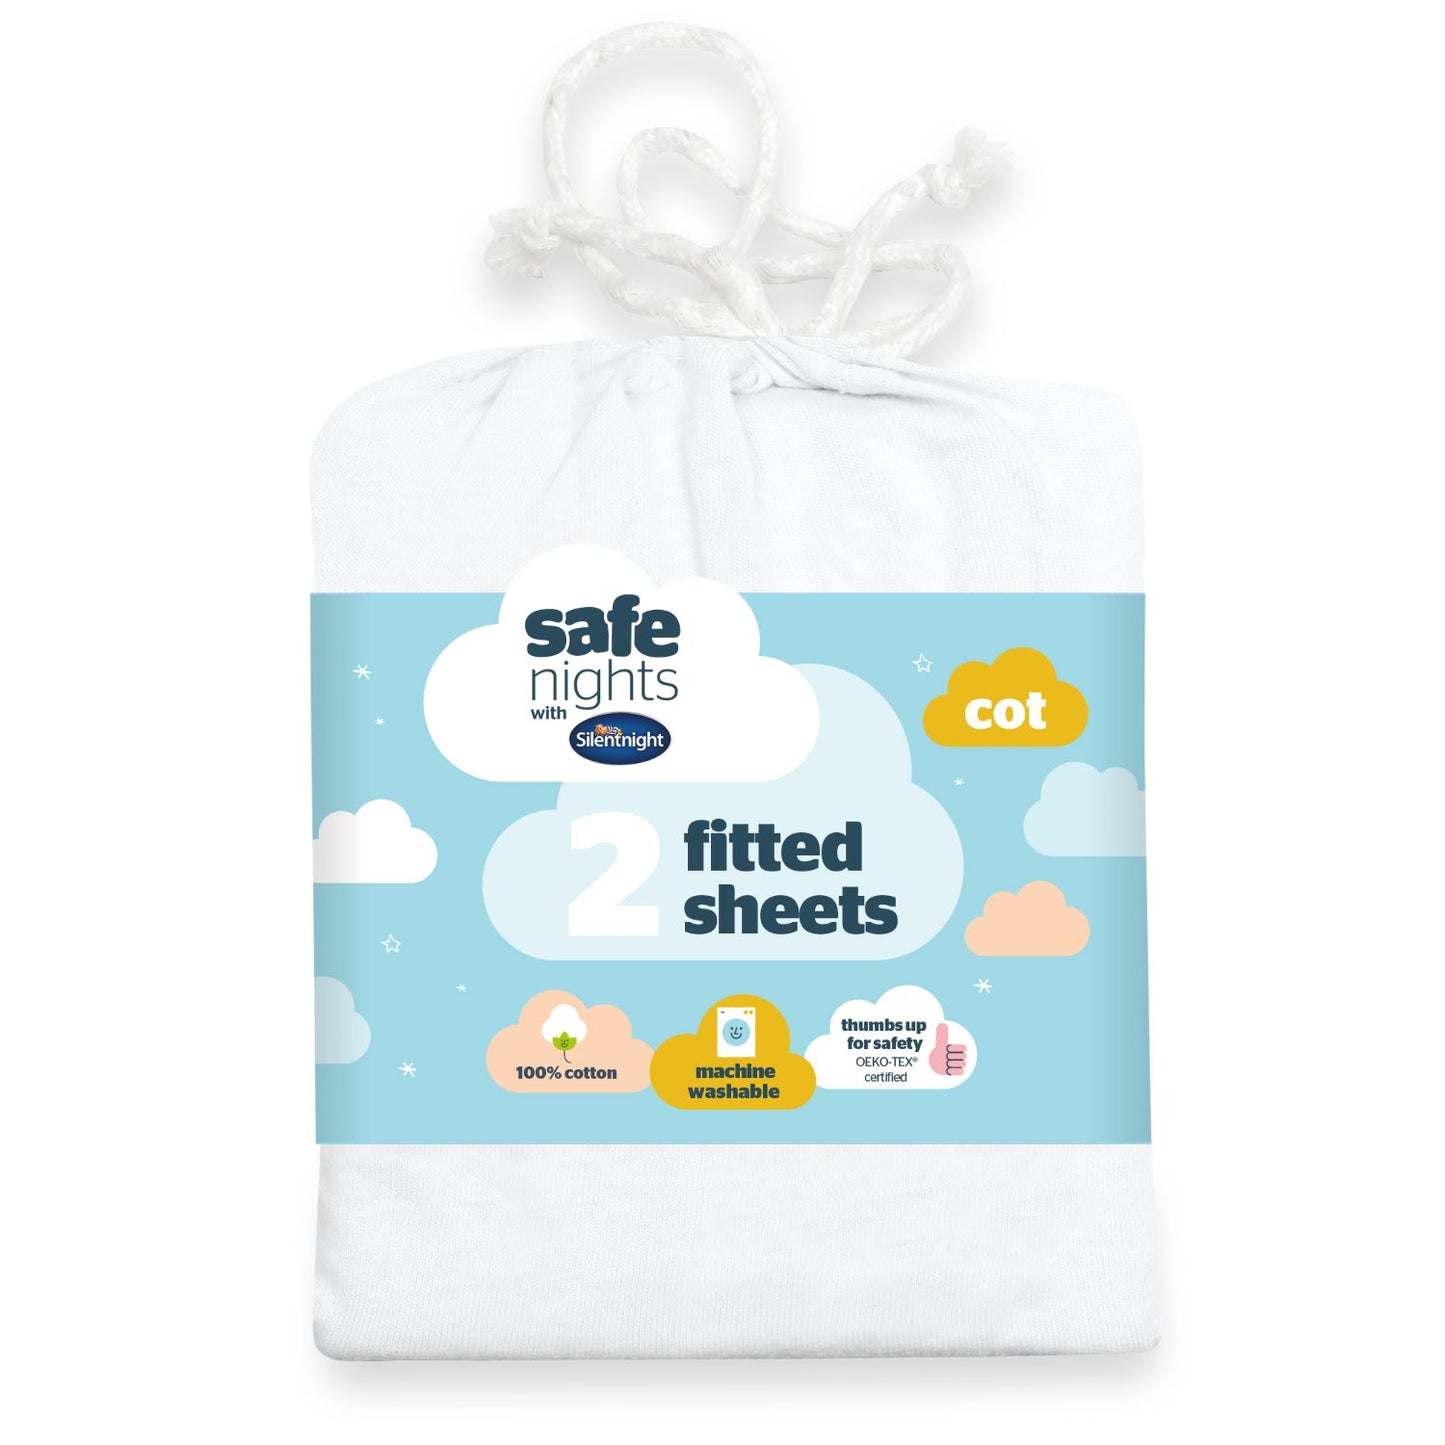 Silentnight Safe Nights White 100% Cotton Baby Fitted Sheet (2 Pack)